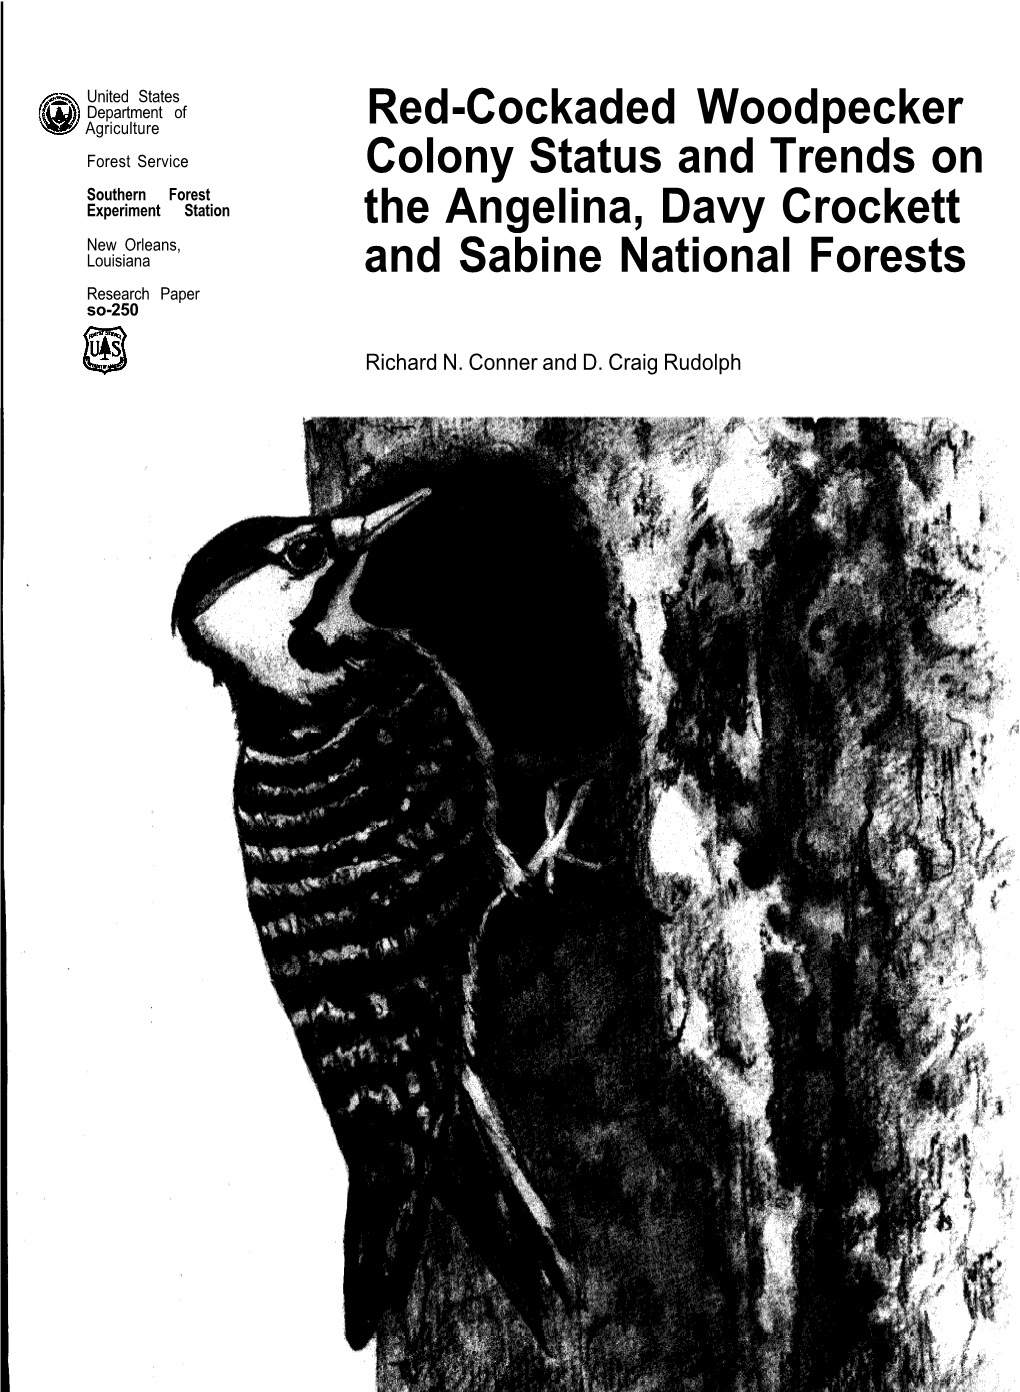 Red-Cockaded Woodpecker Colony Status and Trends on the Angelina, Davy Crockett, and Sabine National Forests